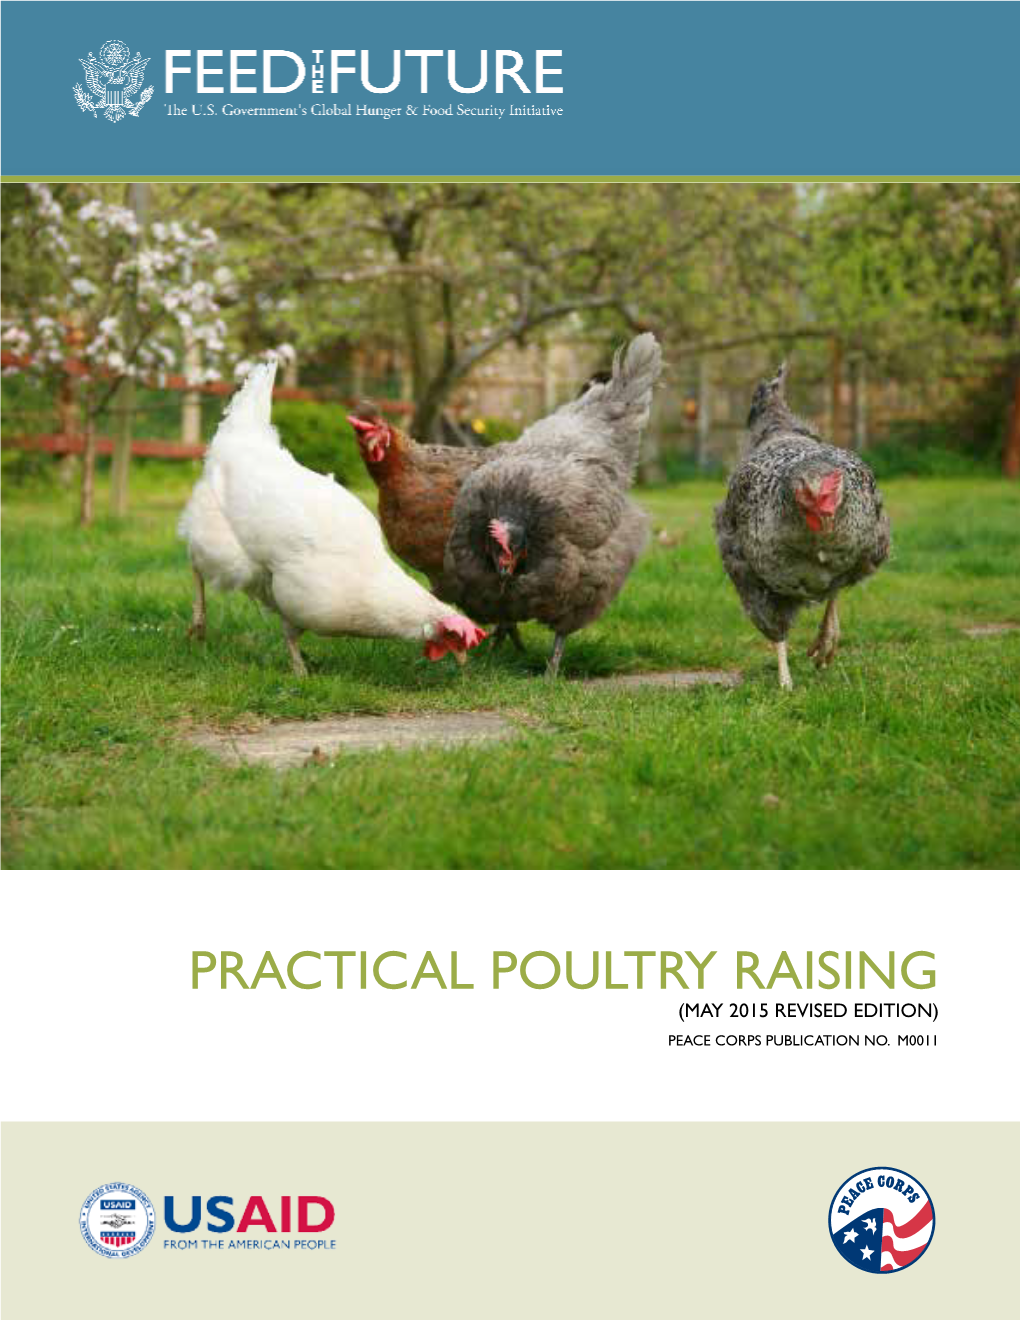 Practical Poultry Raising (May 2015 Revised Edition) Peace Corps Publication No